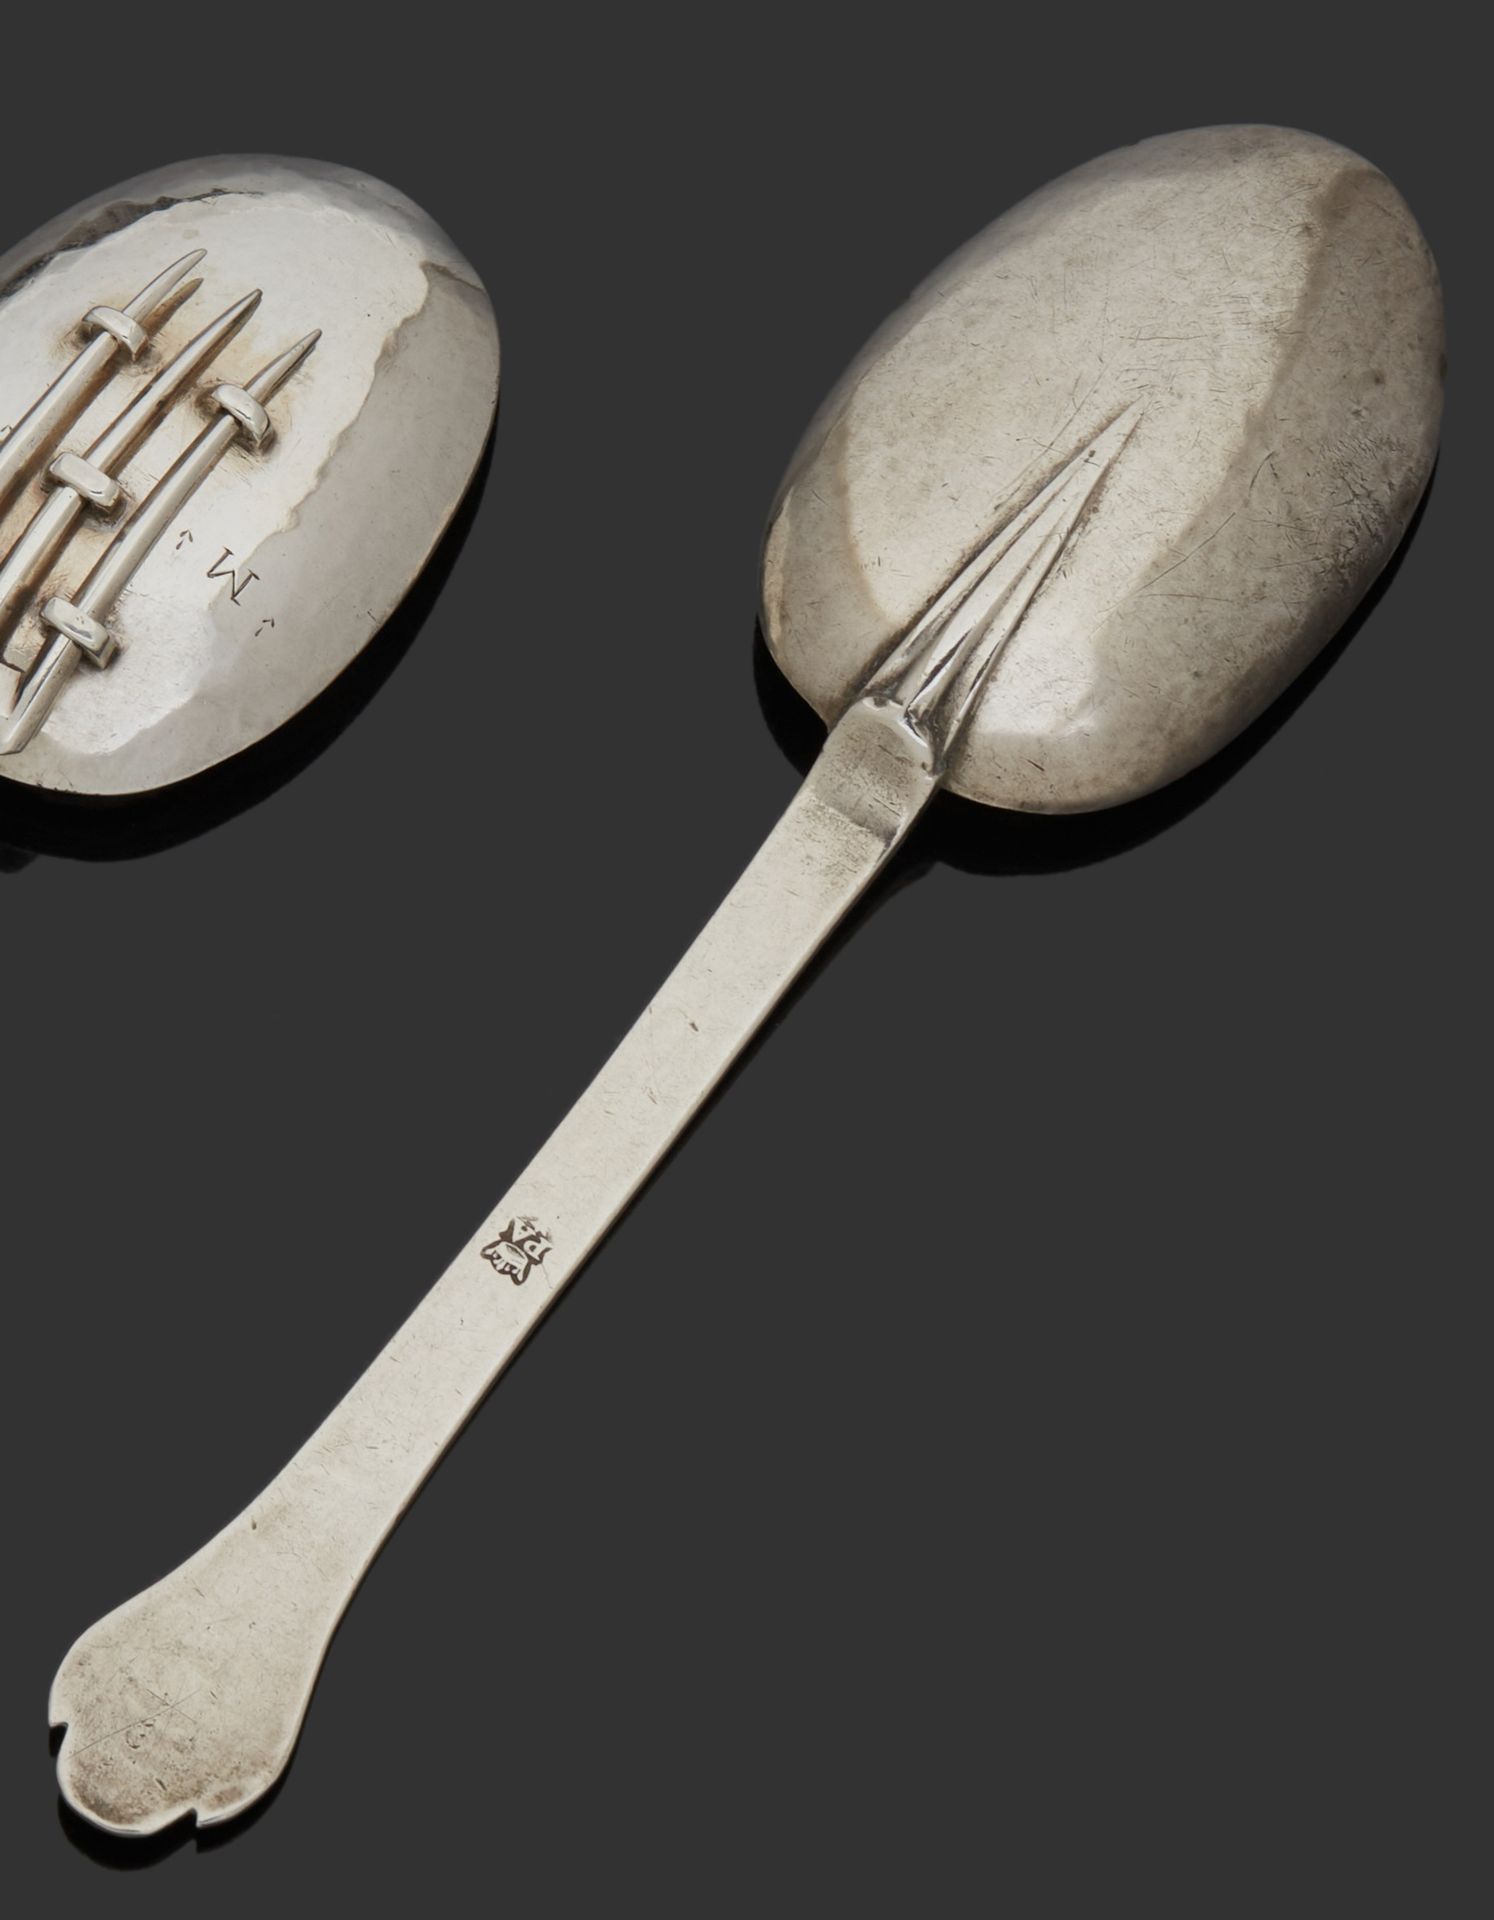 Null PROVINCE C. 1650
A silver spoon rat tail model with a three-lobed spatula.
&hellip;